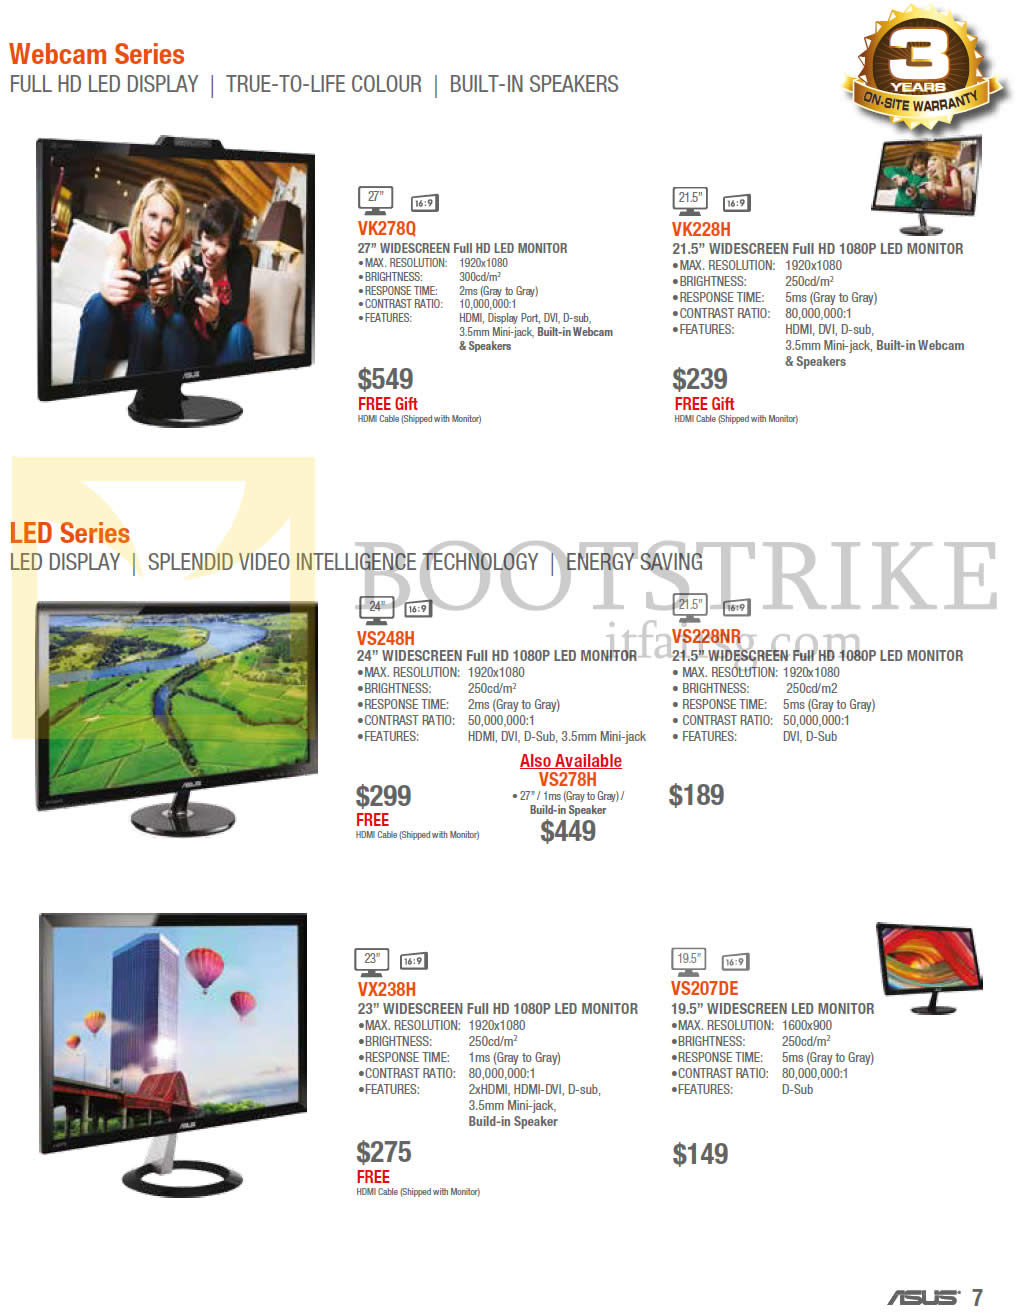 IT SHOW 2014 price list image brochure of ASUS LED Monitors Webcam VK278Q, VK228H, LED VS248H, VS228NR, VX238H, VS207DE